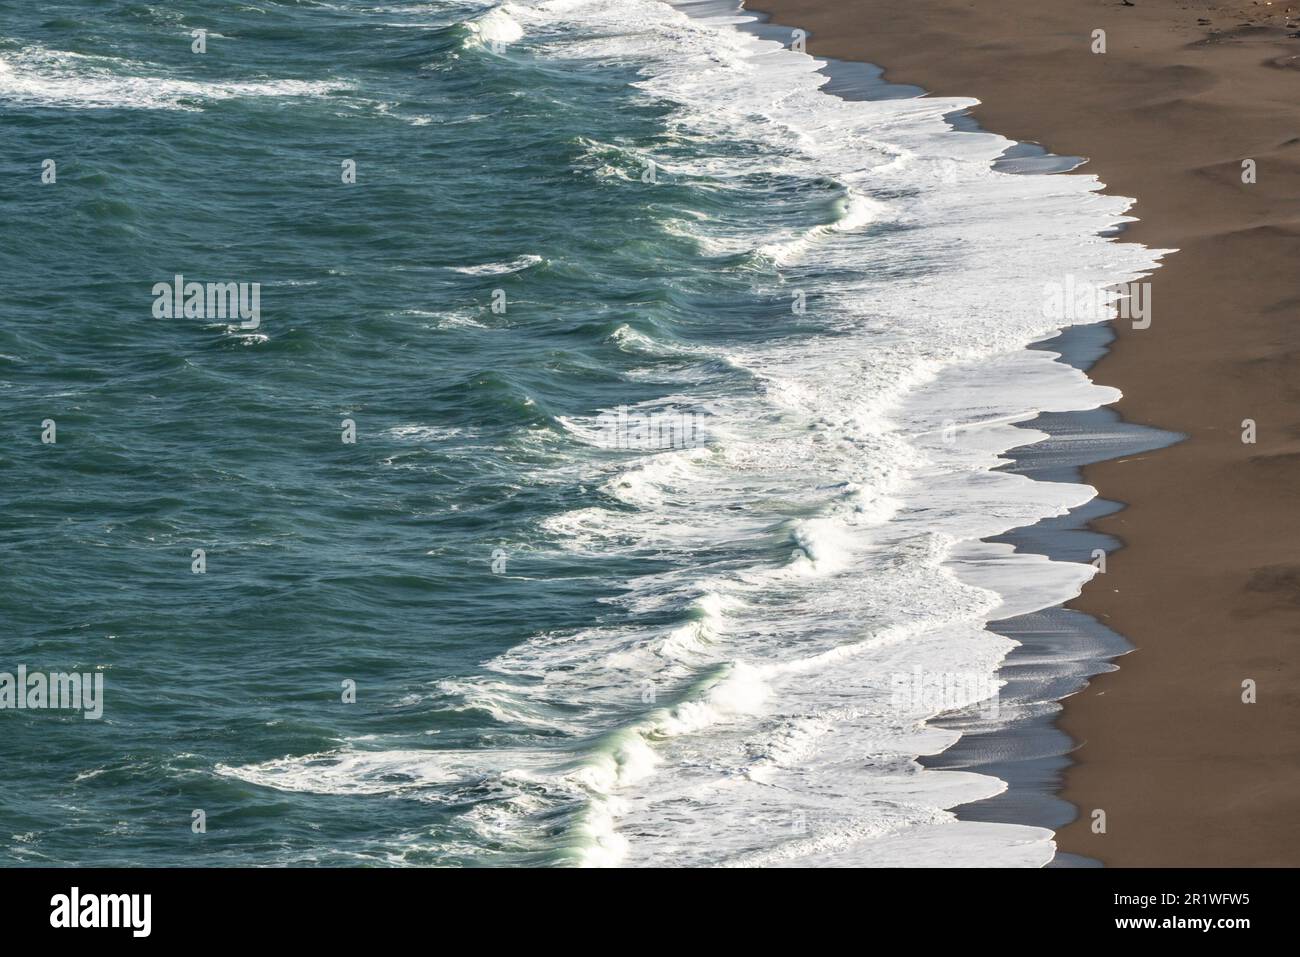 Nature landscape with ocean waves along a sandy beach Stock Photo